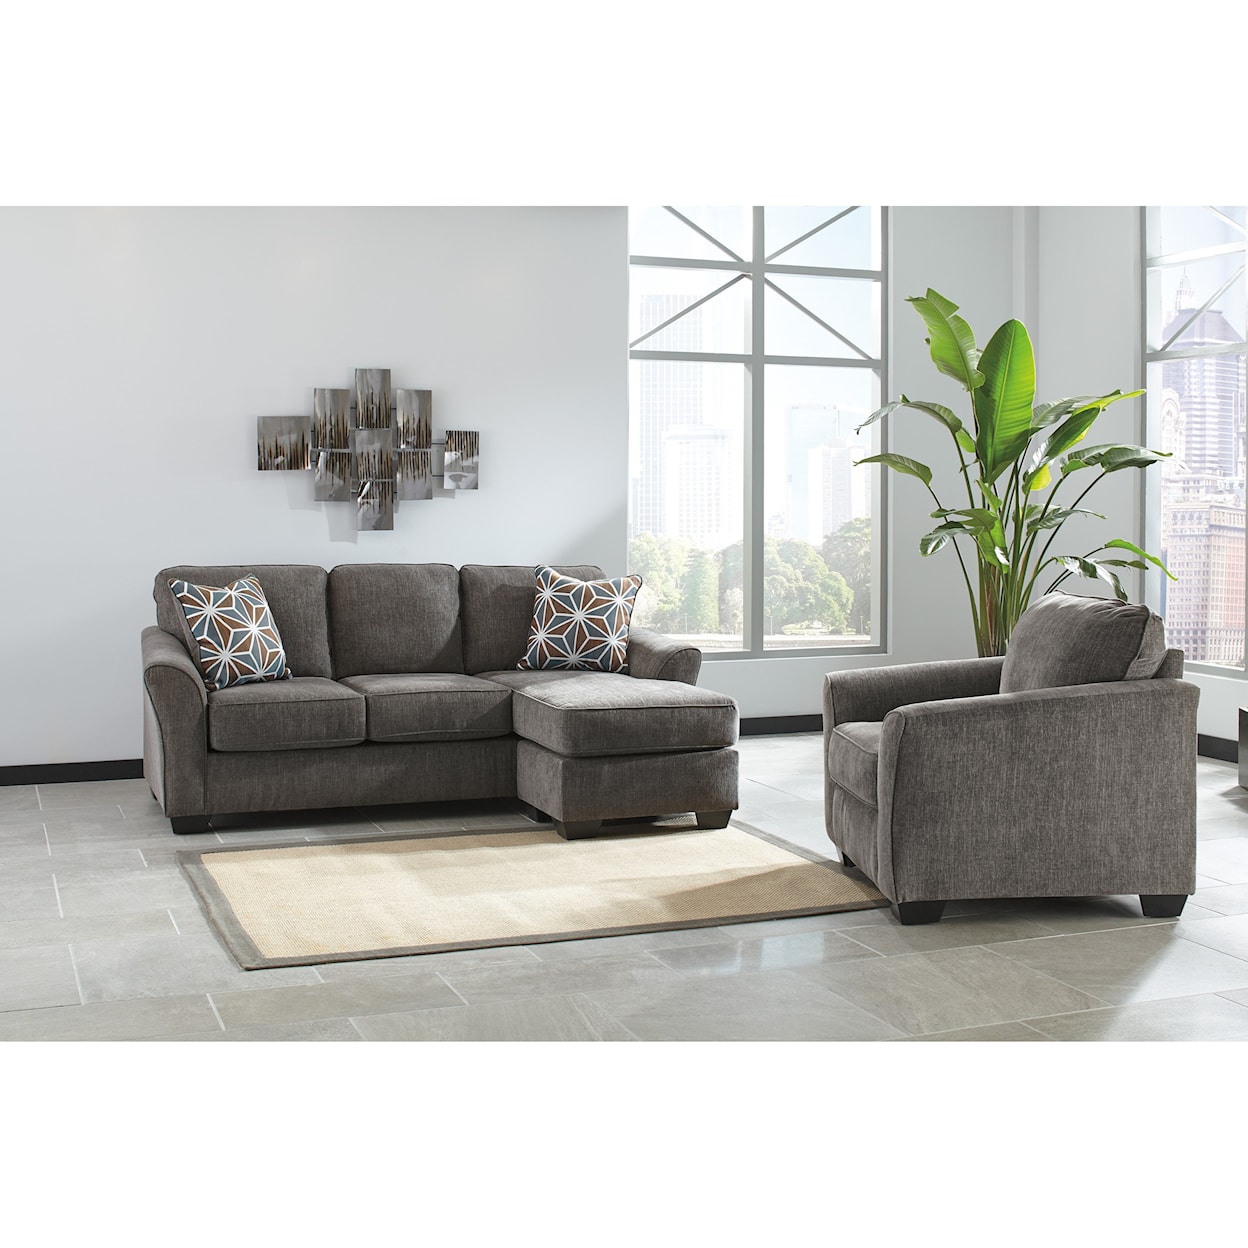 Benchcraft Brise Stationary Living Room Group